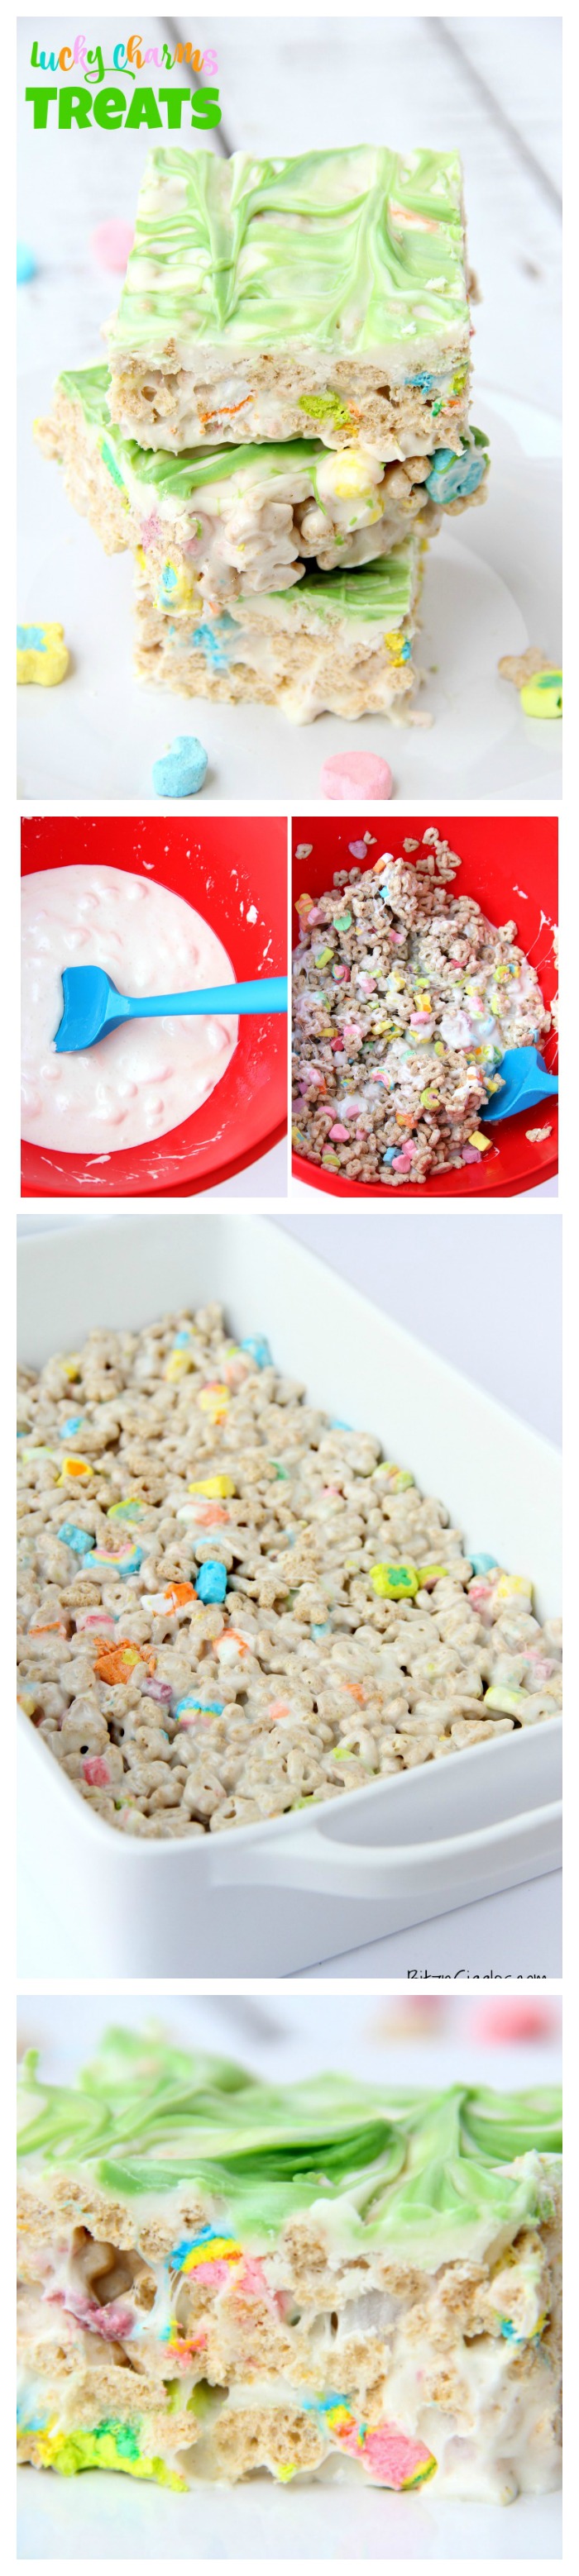 Microwave Lucky Charms Treats - Ooey, gooey, marshmallowy treats made with Lucky Charms then topped with a candy melt swirl!